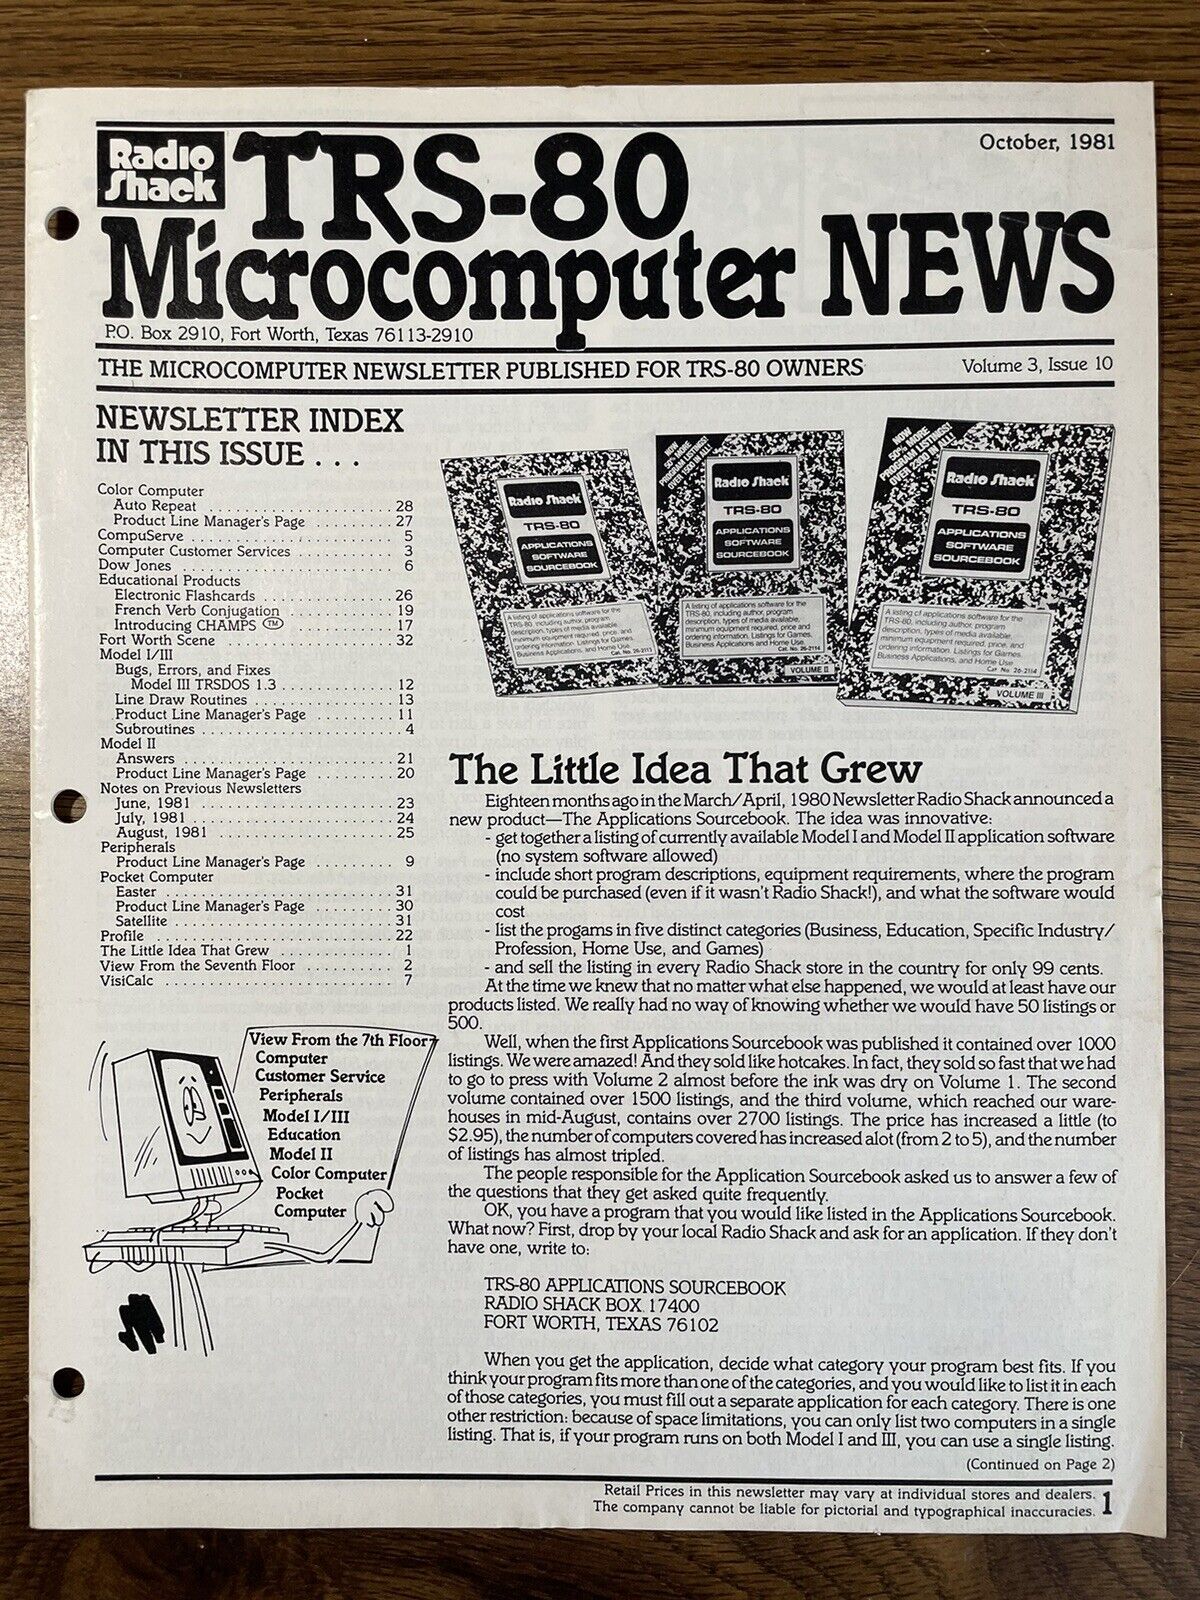 TRS-80 Microcomputer News October 1981